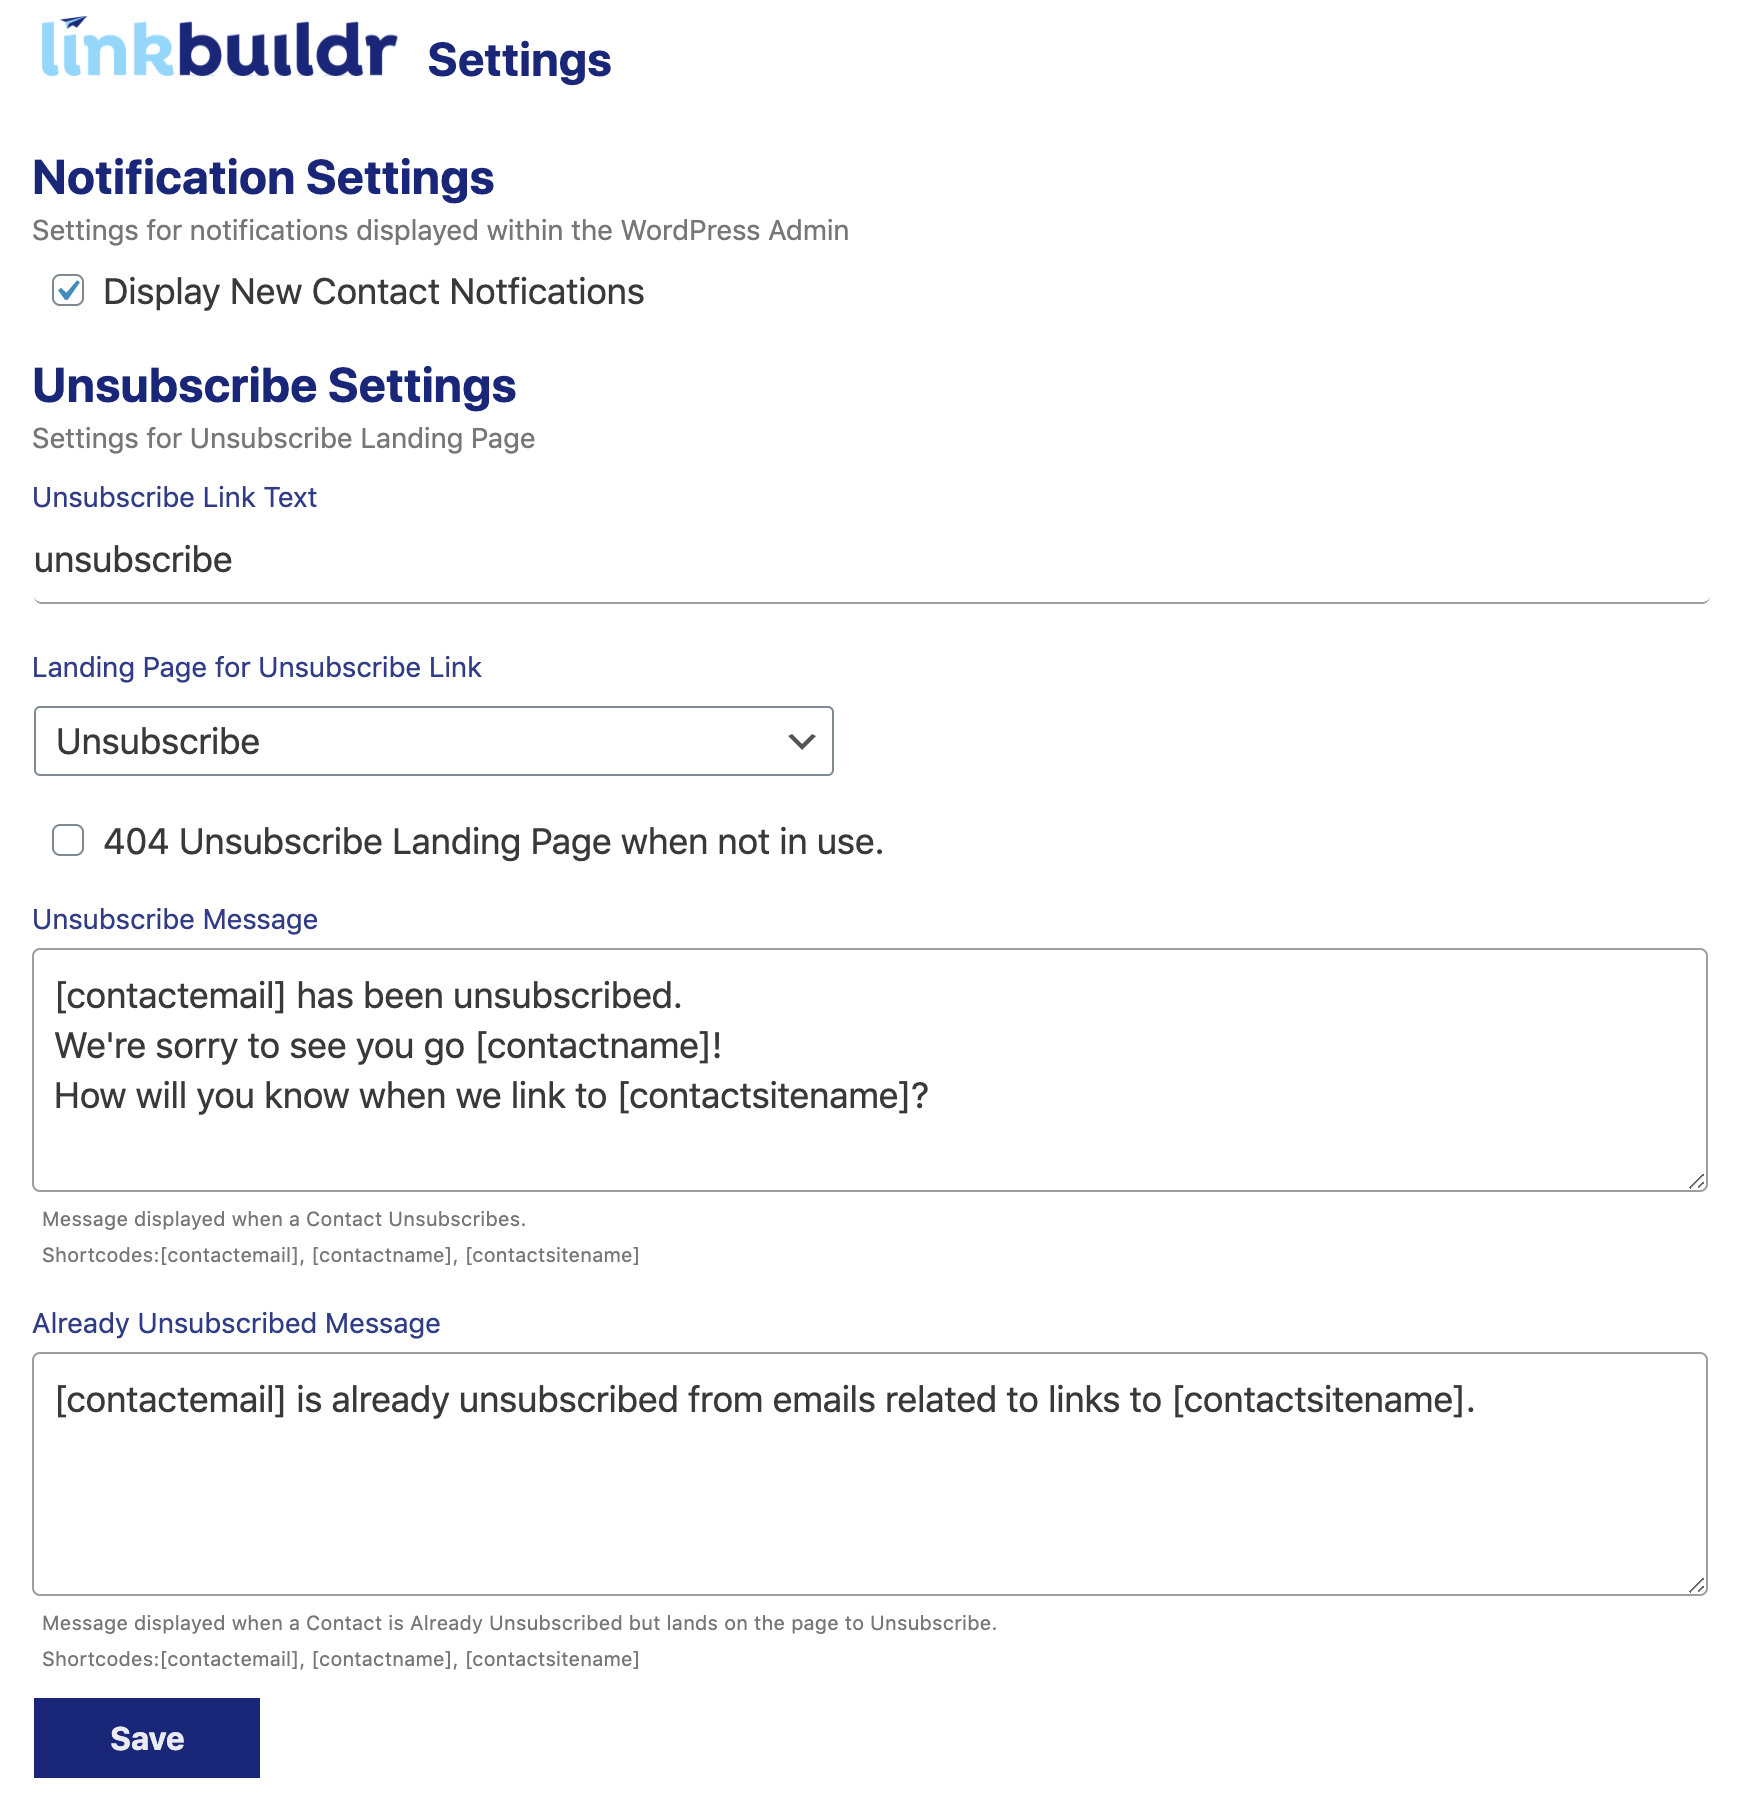 Linkbuildr - Settings: This shows the plugin settings, used to configure Notifications and Unsubscribe settings.